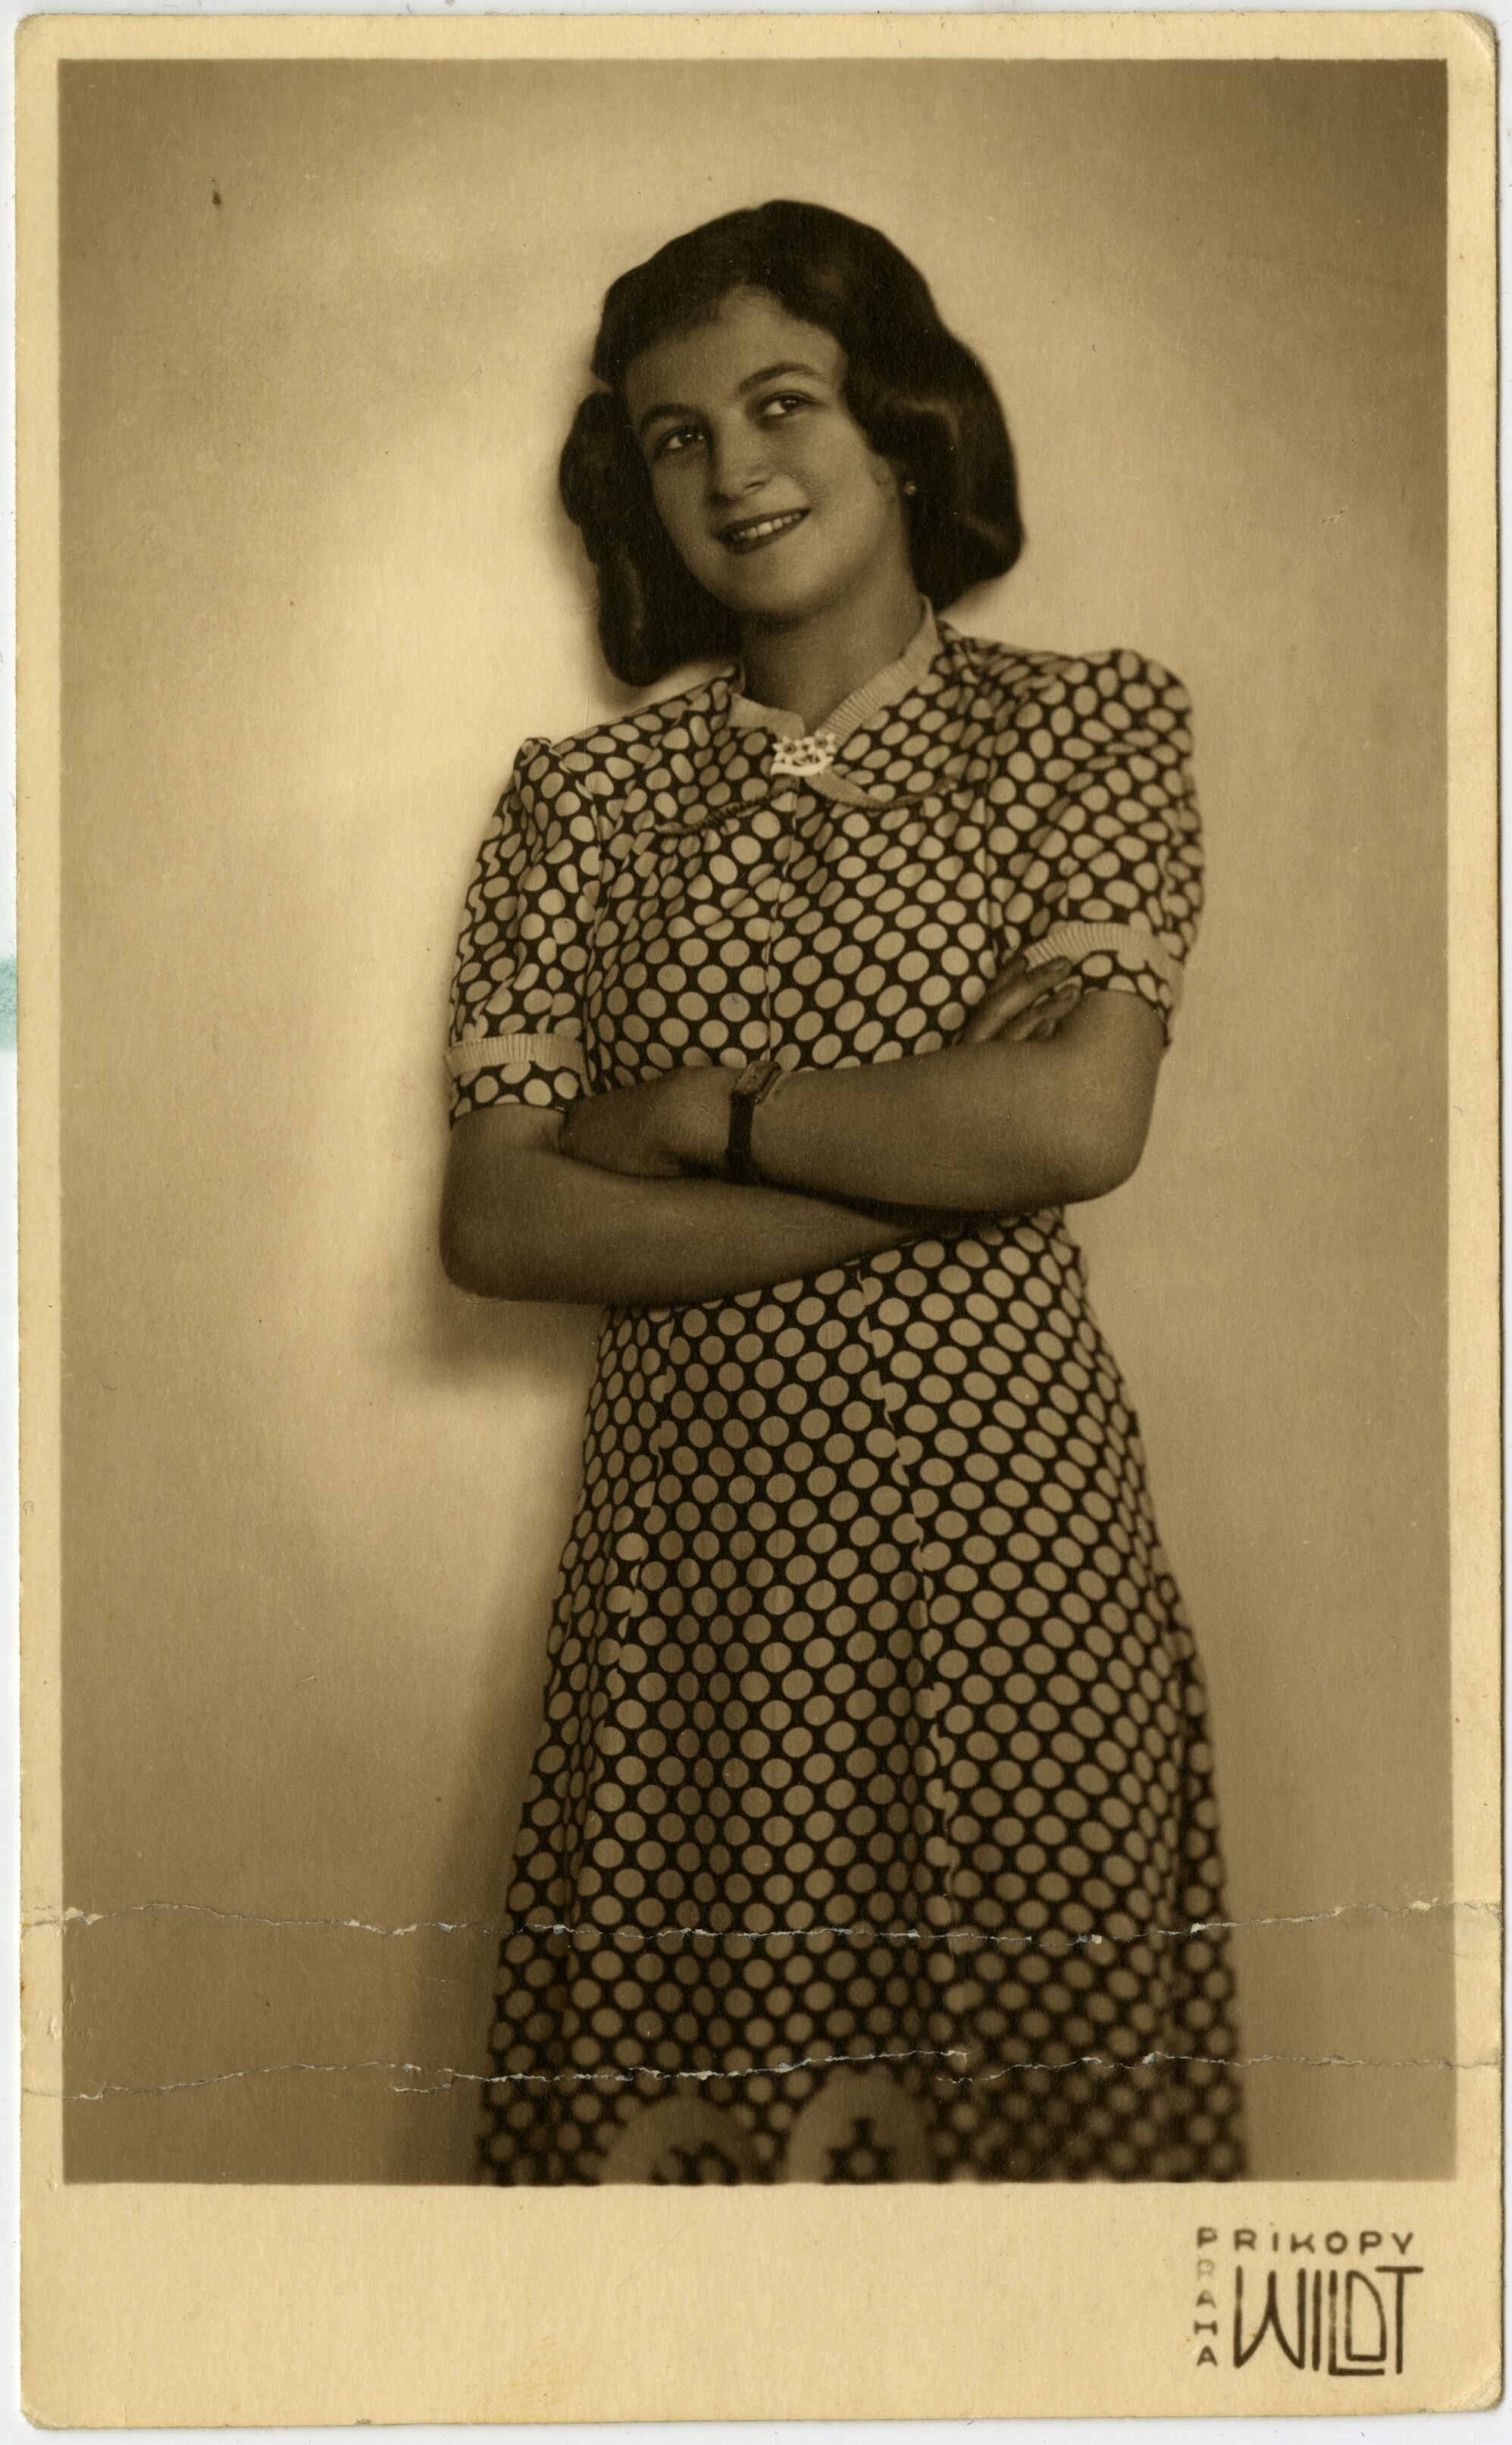 Vera as a young woman